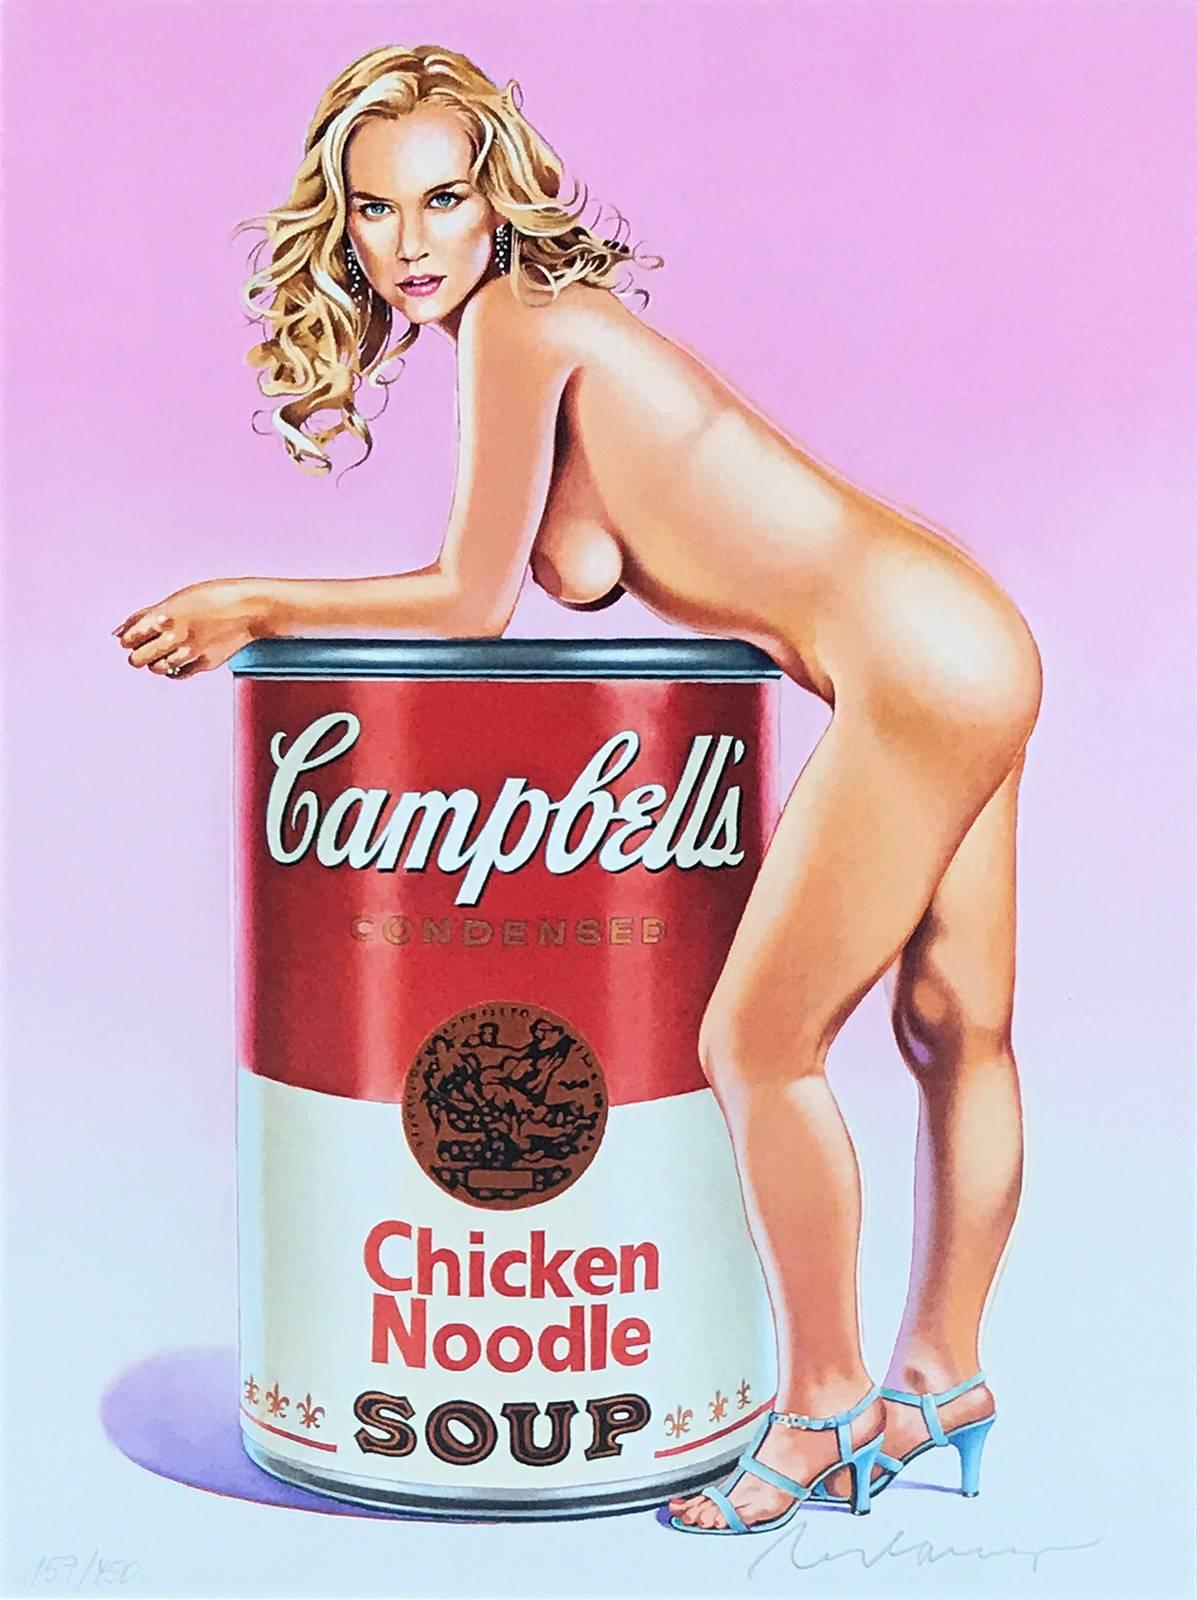 Campbell's Soup Blondes (Chicken), American Pop Art, 21st Century - Print by Mel Ramos